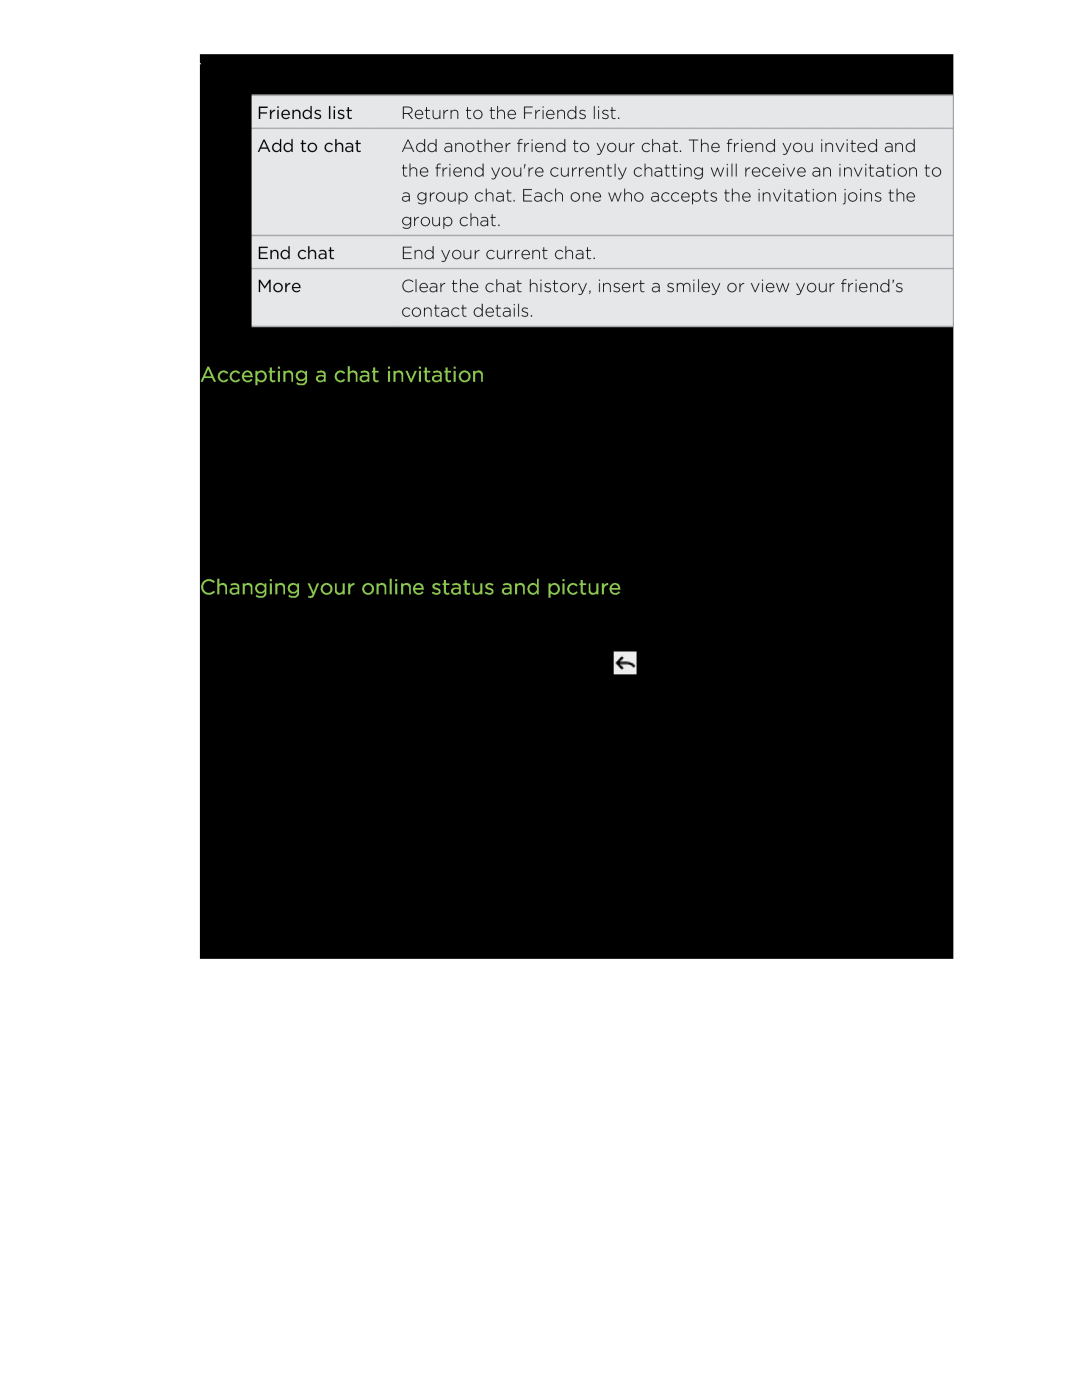 HTC manual Accepting a chat invitation, Changing your online status and picture, Social 